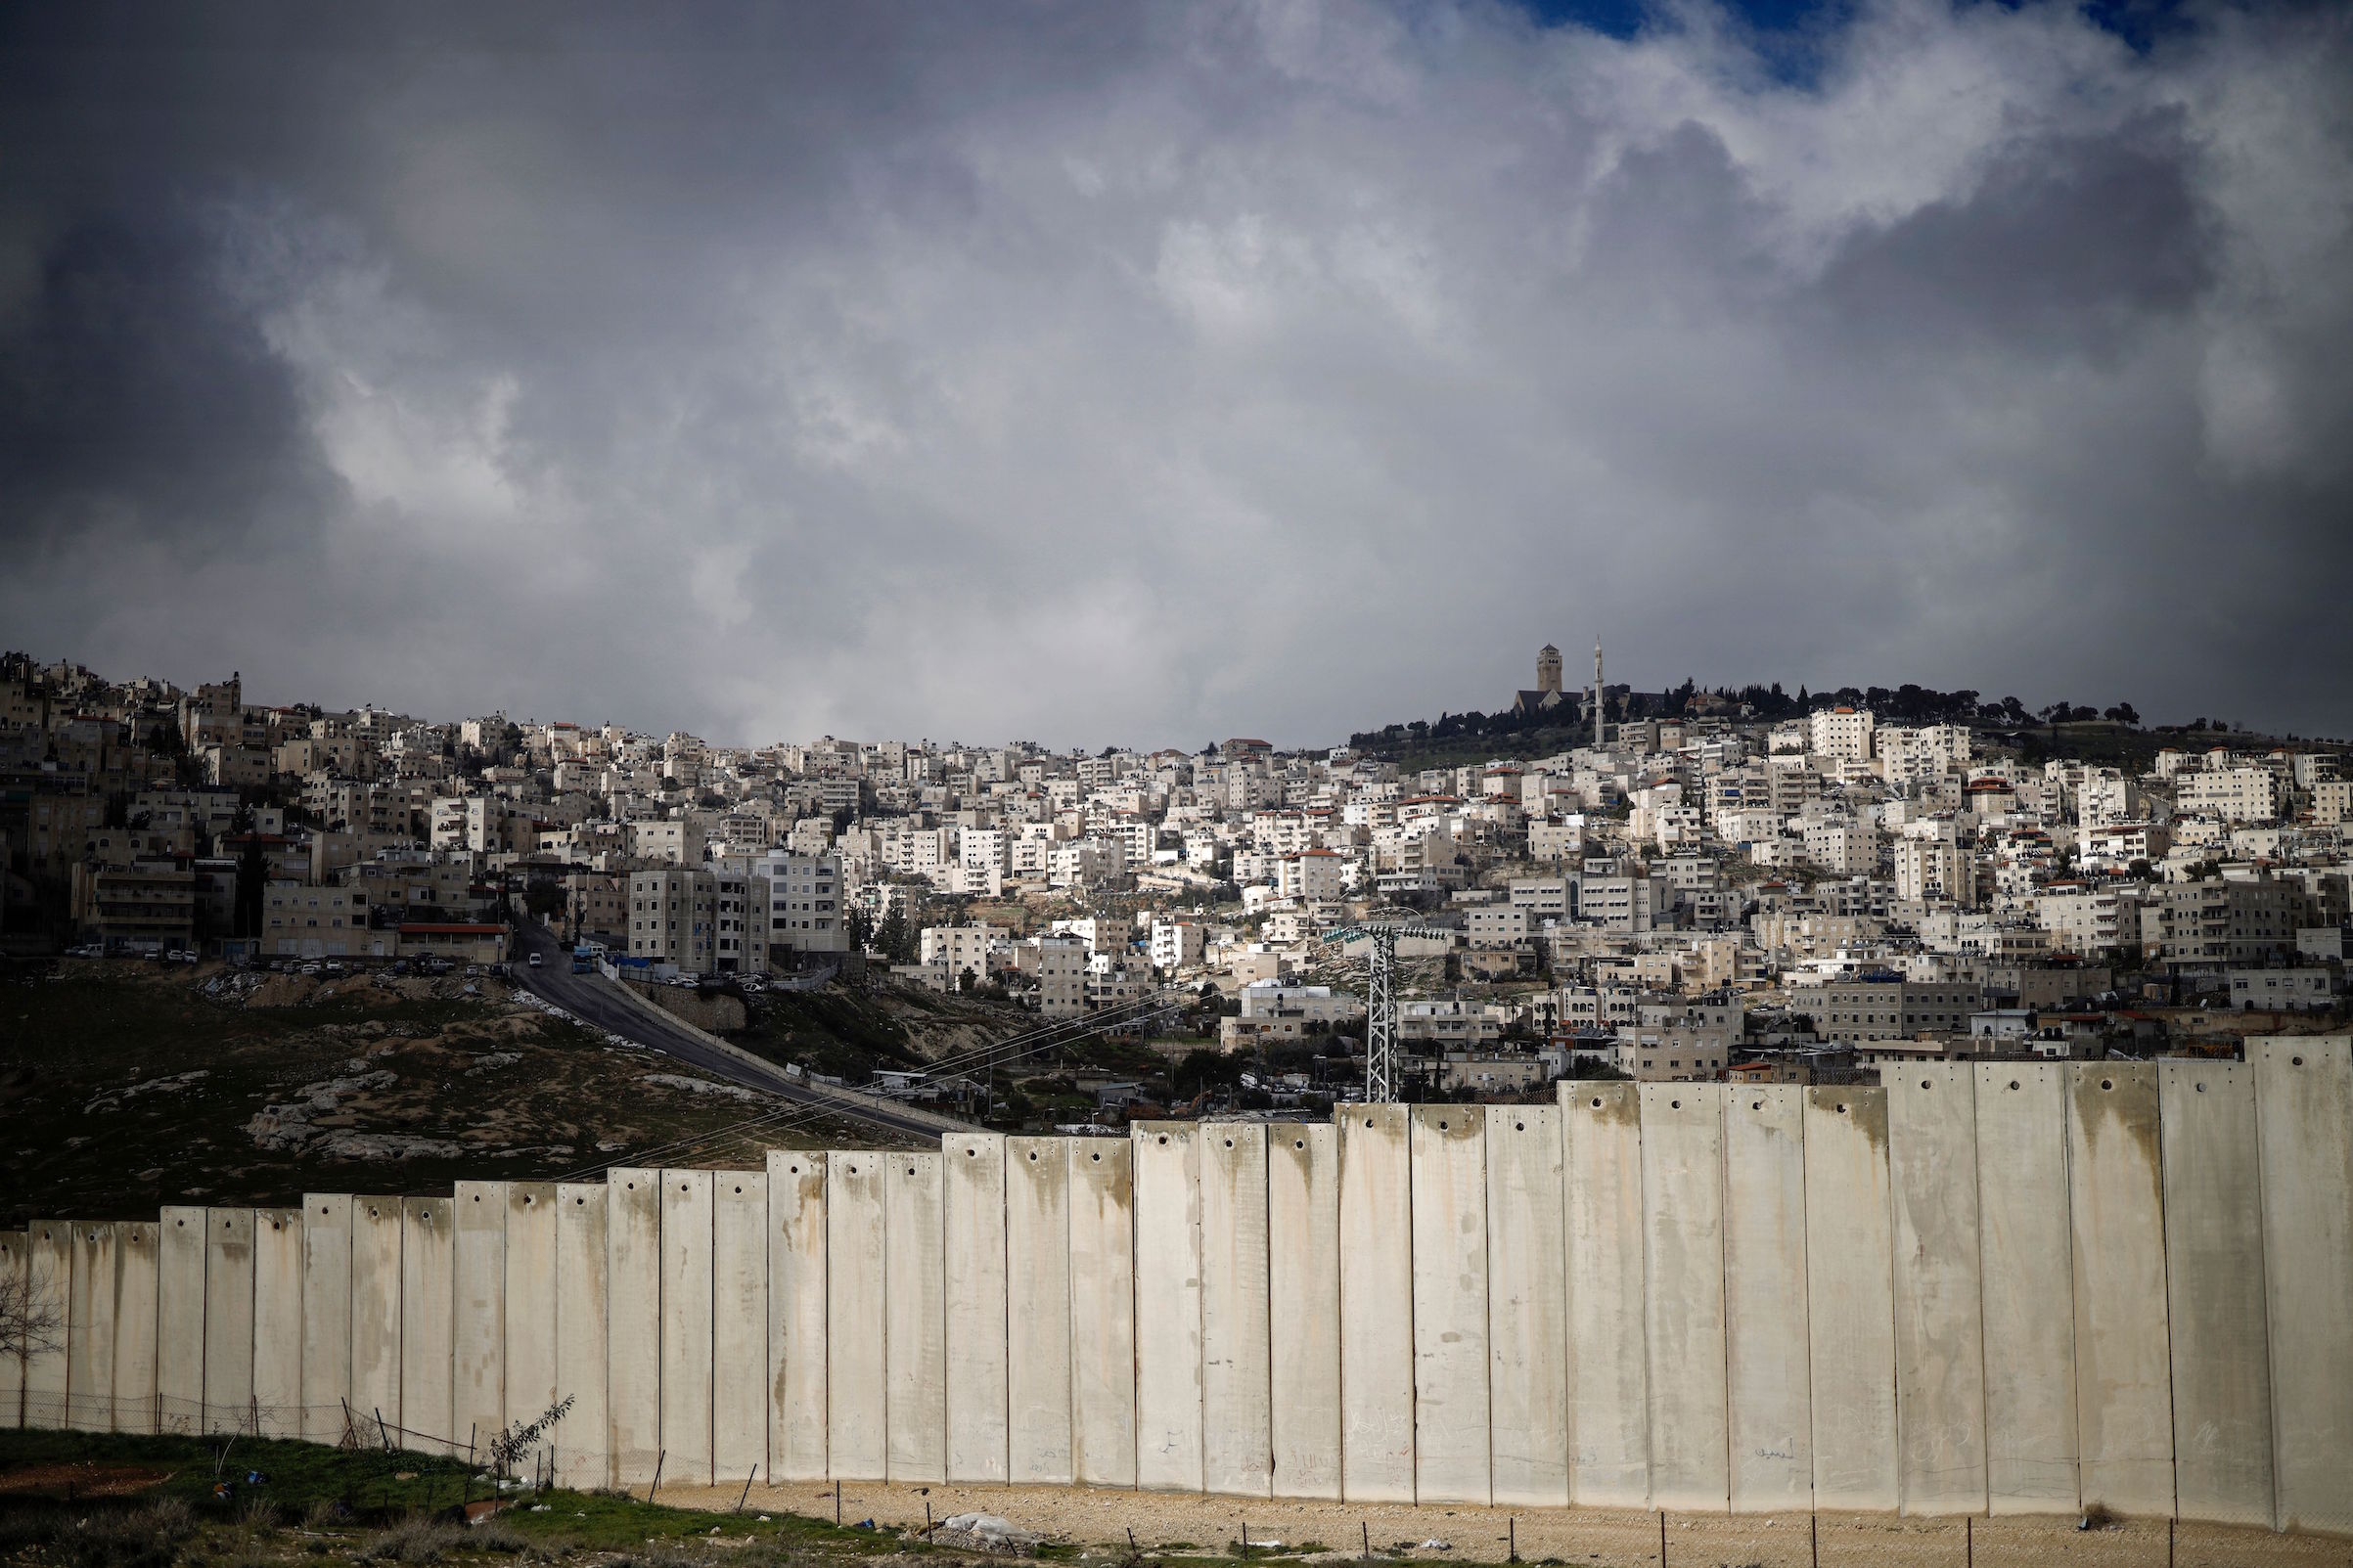 This picture taken on Jan. 17, 2019, shows the controversial barrier separating the Palestinian West Bank village of Eizariya (foreground) and Jerusalem (background). (Thomas Coex—AFP/Getty Images)